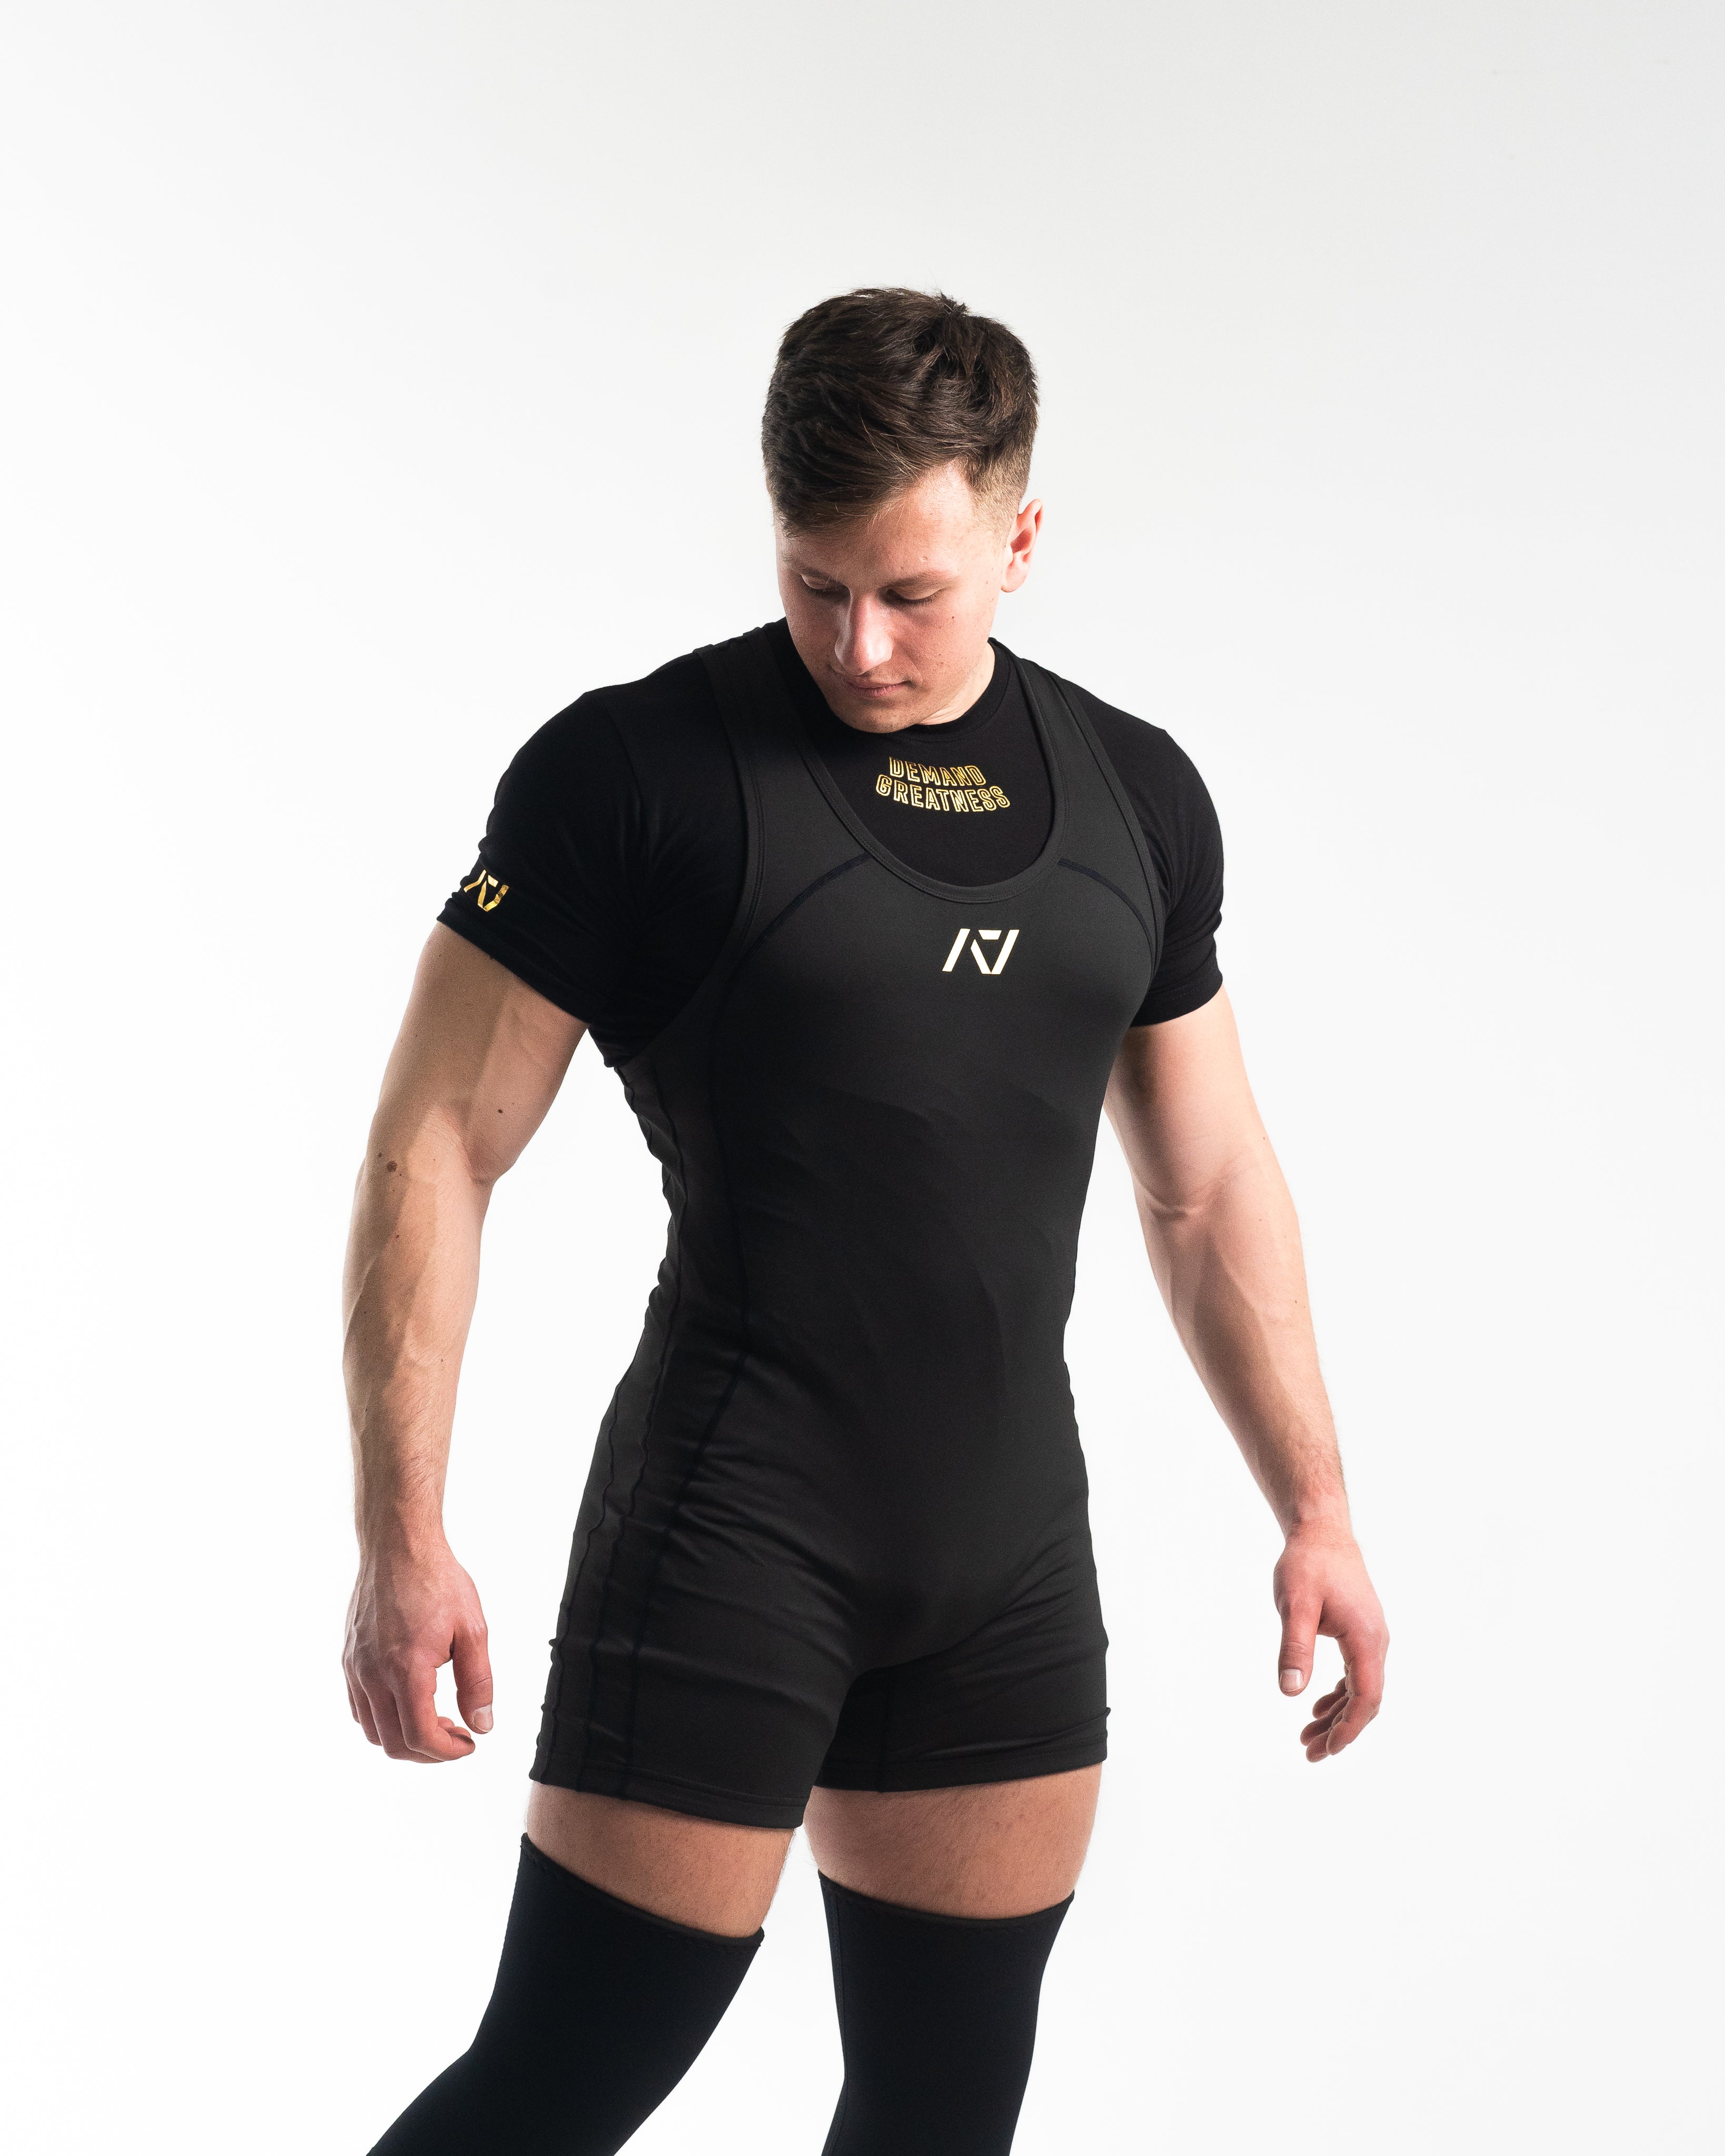 A7 Black Powerlifting Singlet, IPF Approved Singlet